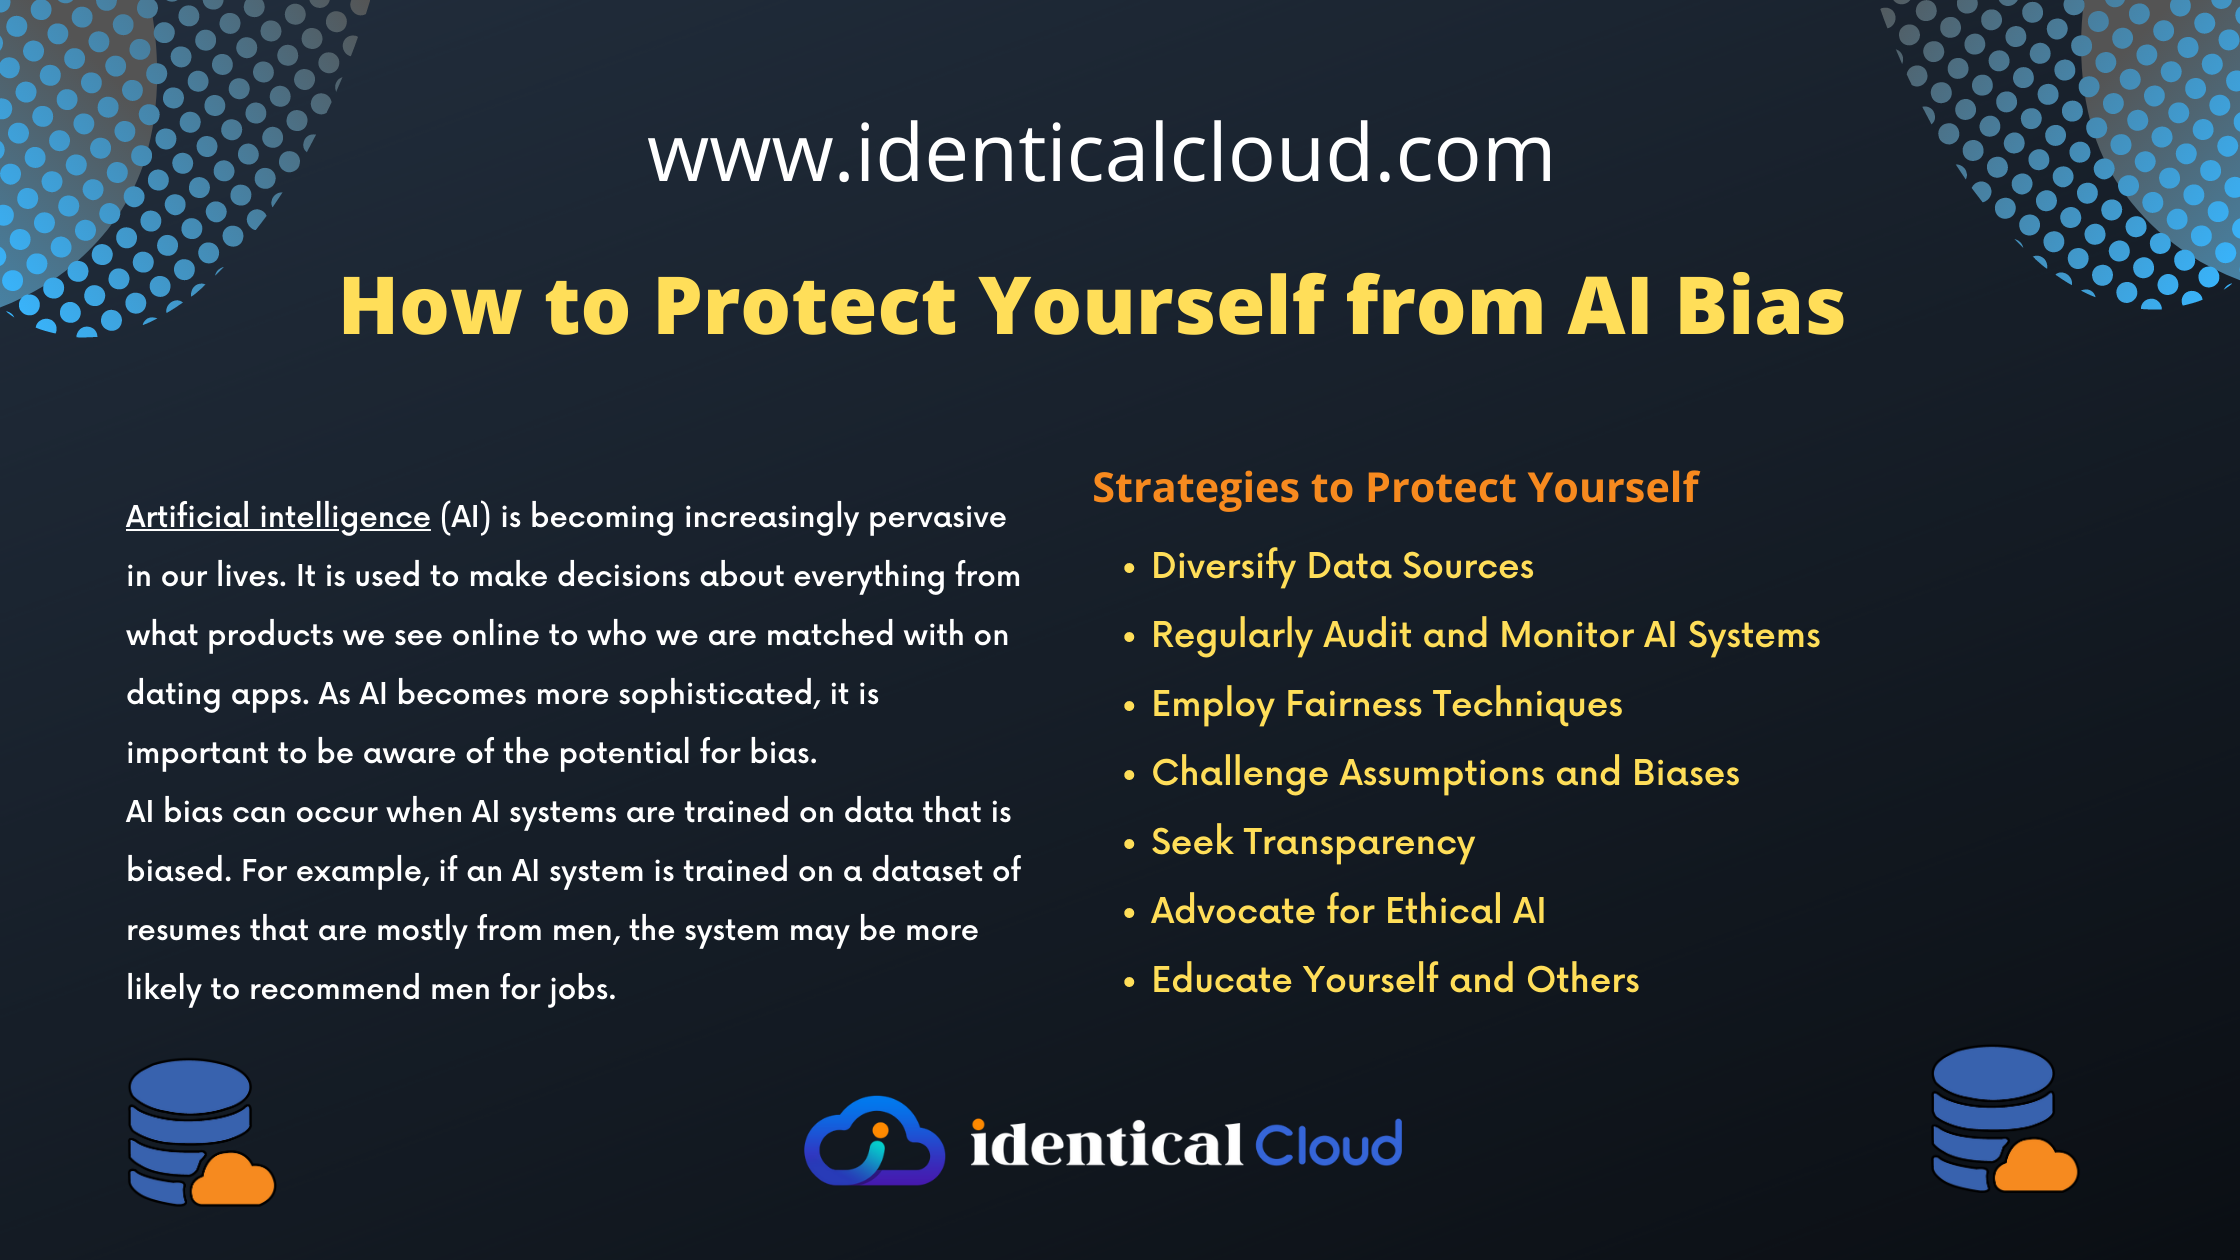 How to Protect Yourself from AI Bias - identicalcloud.com